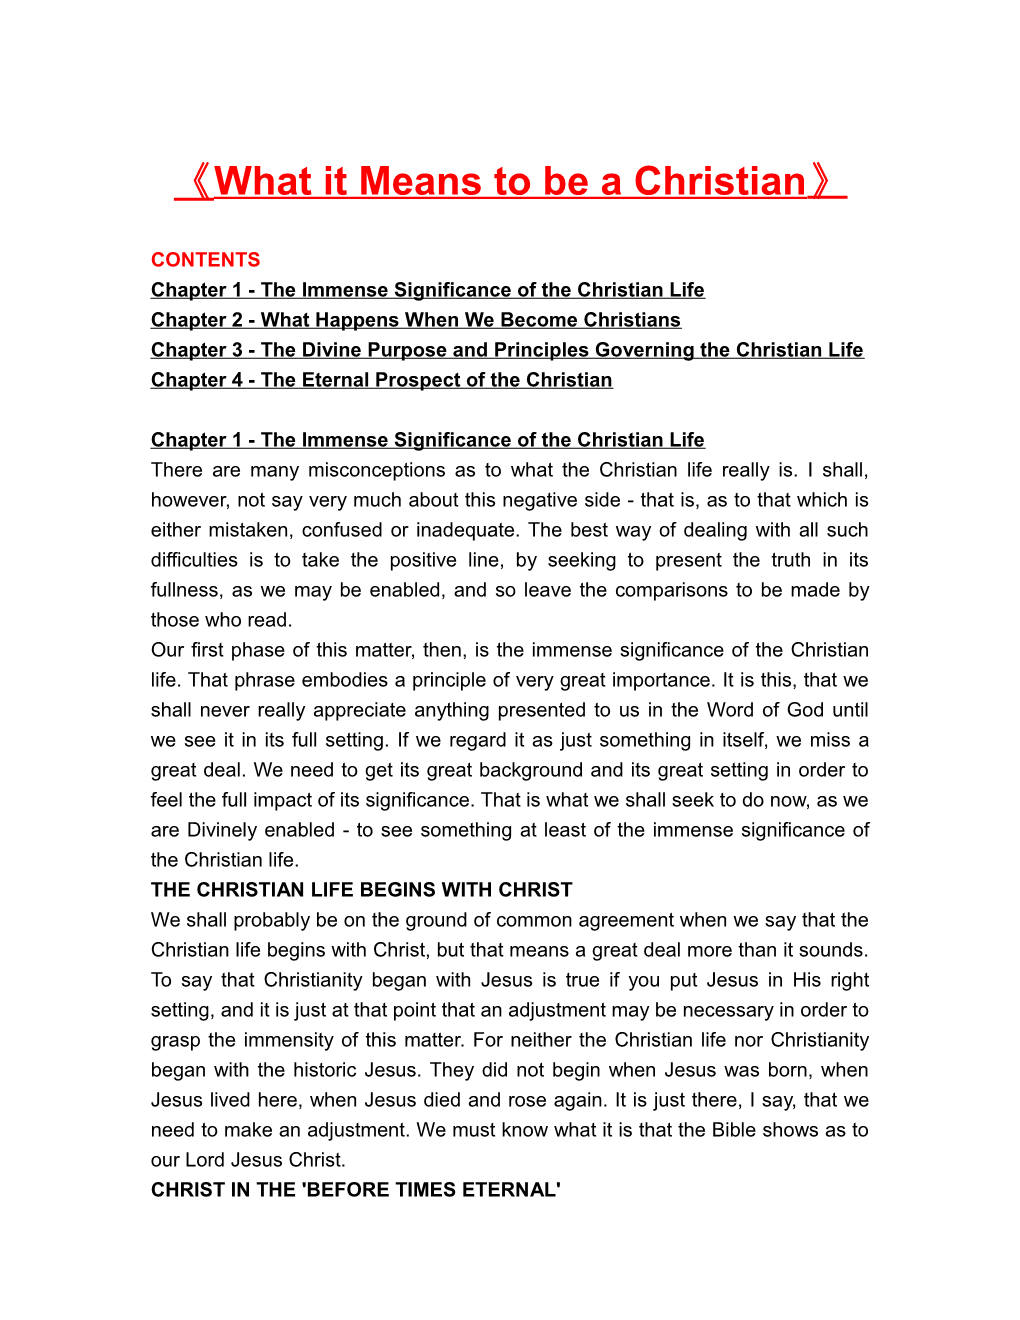 Chapter 1 - the Immense Significance of the Christian Life